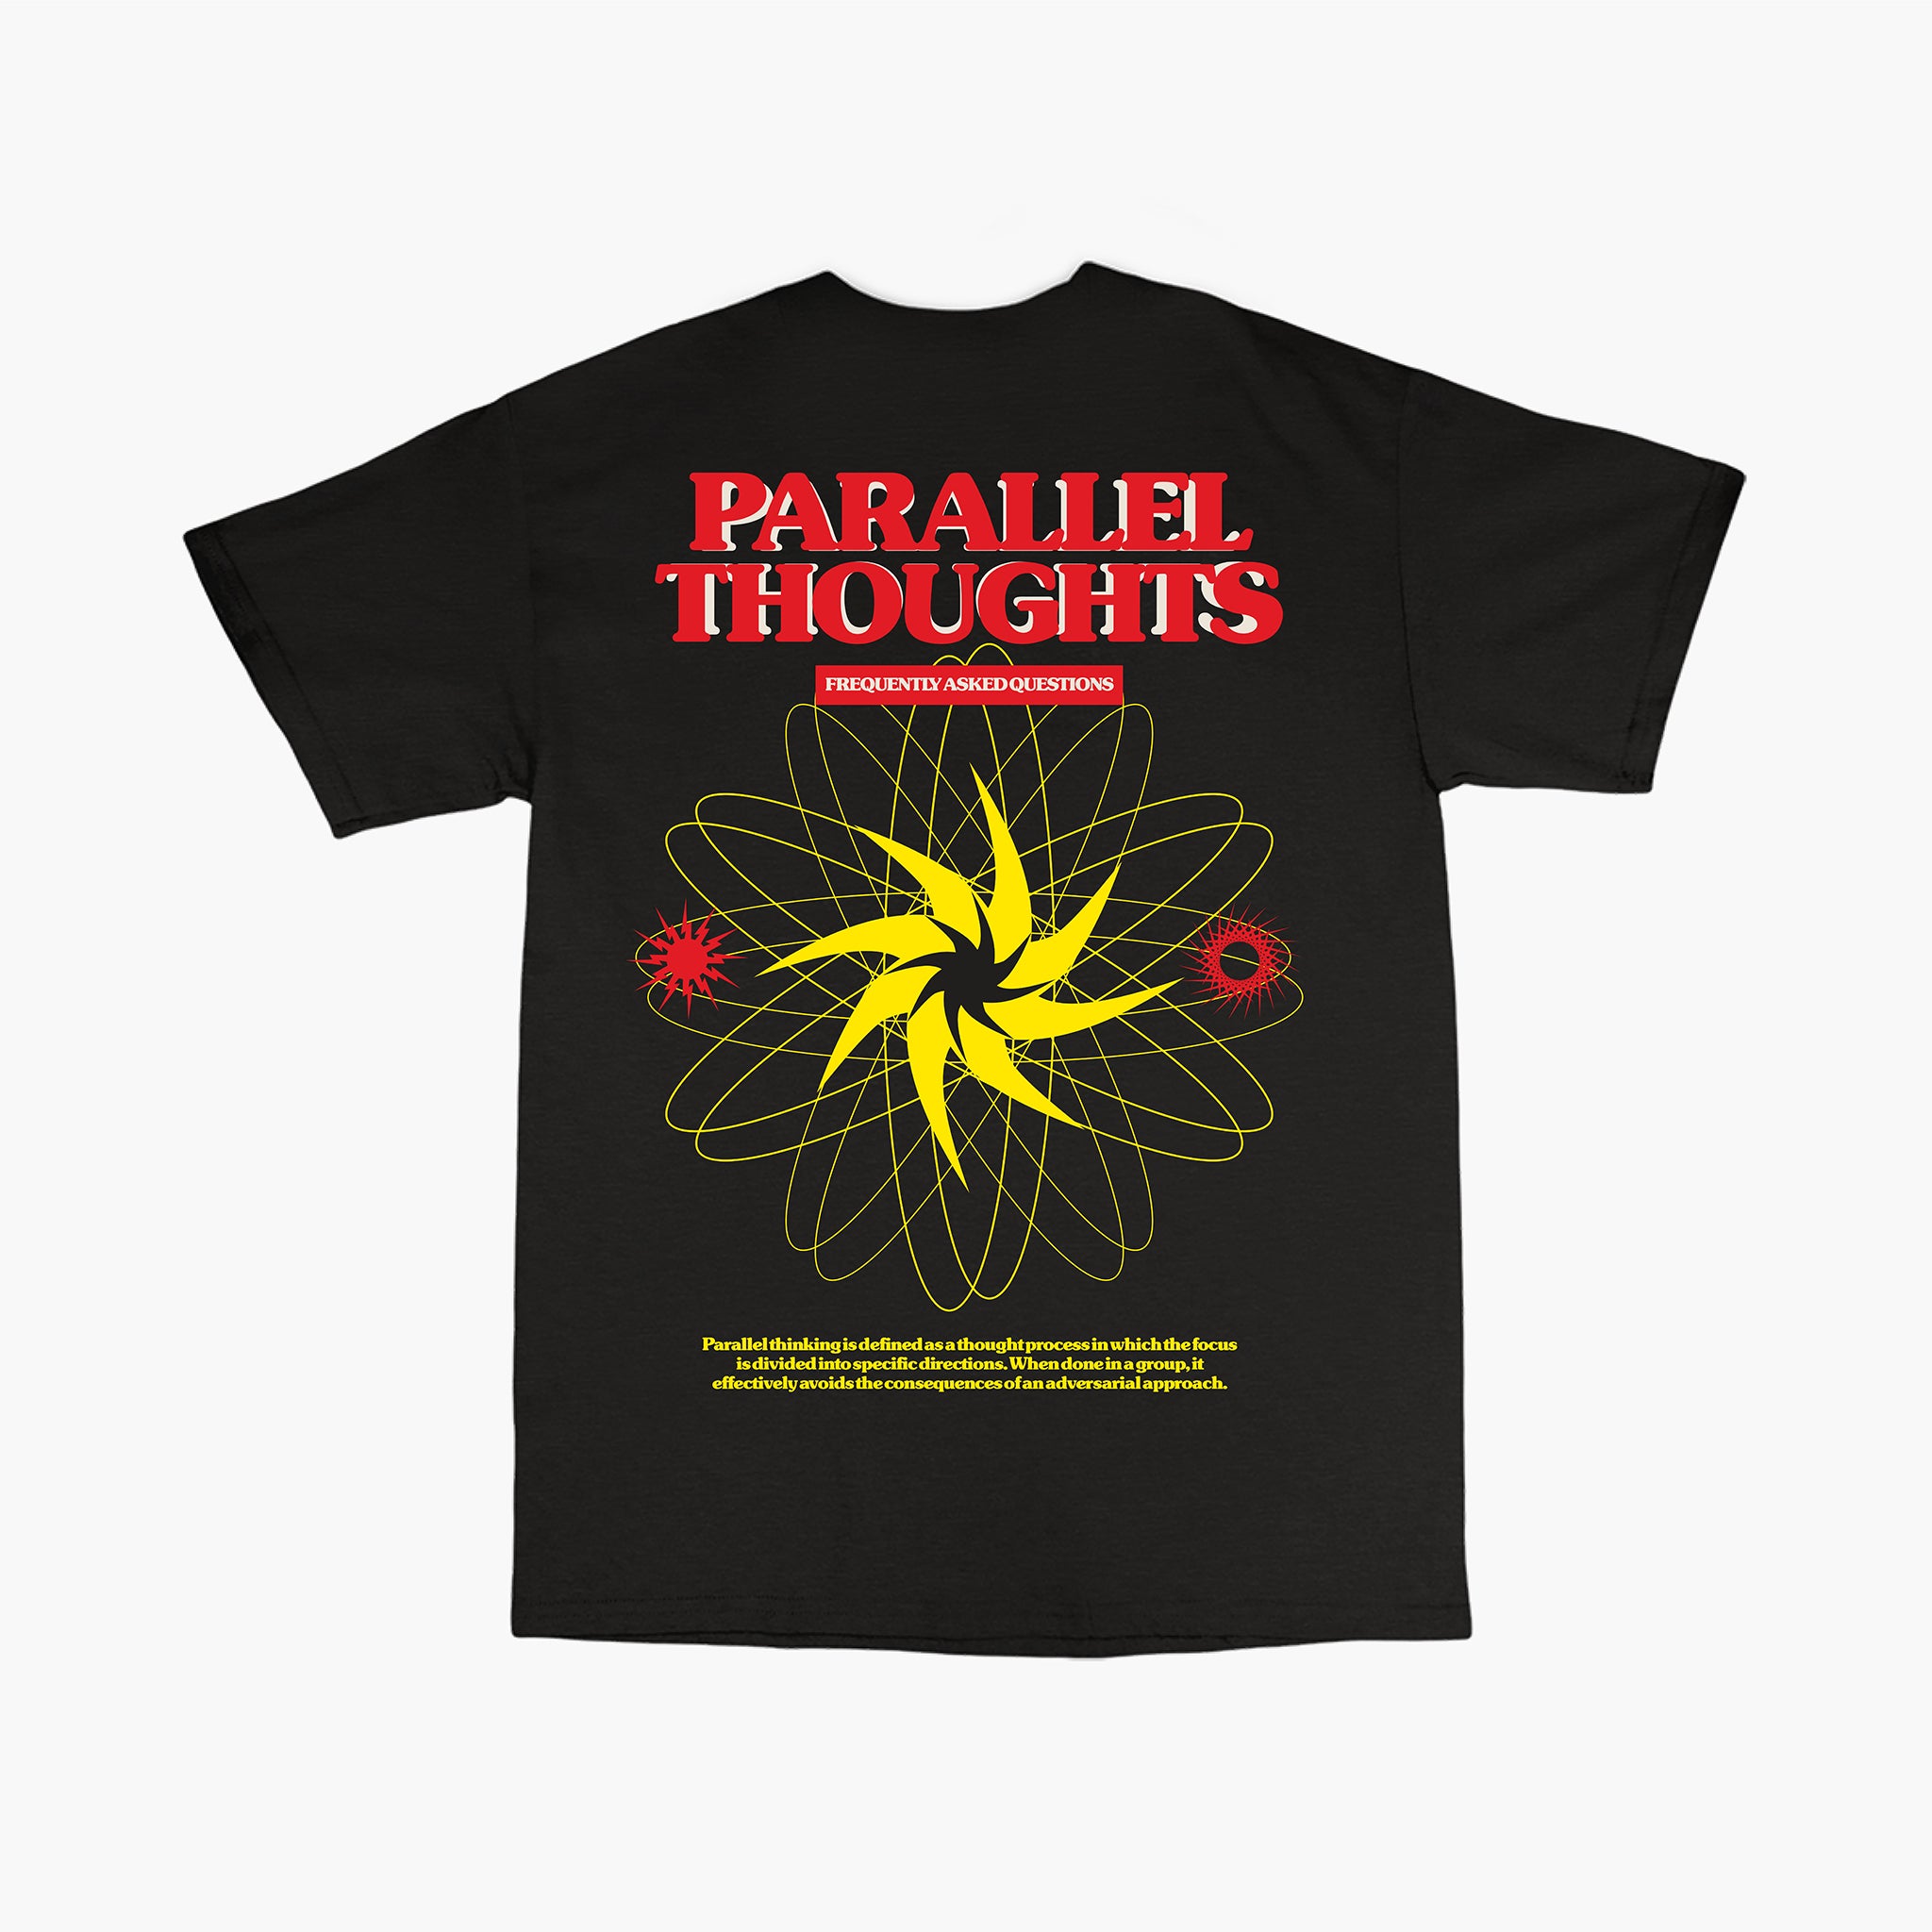 Parallel Thoughts T-Shirt - Frequently Asked Questions